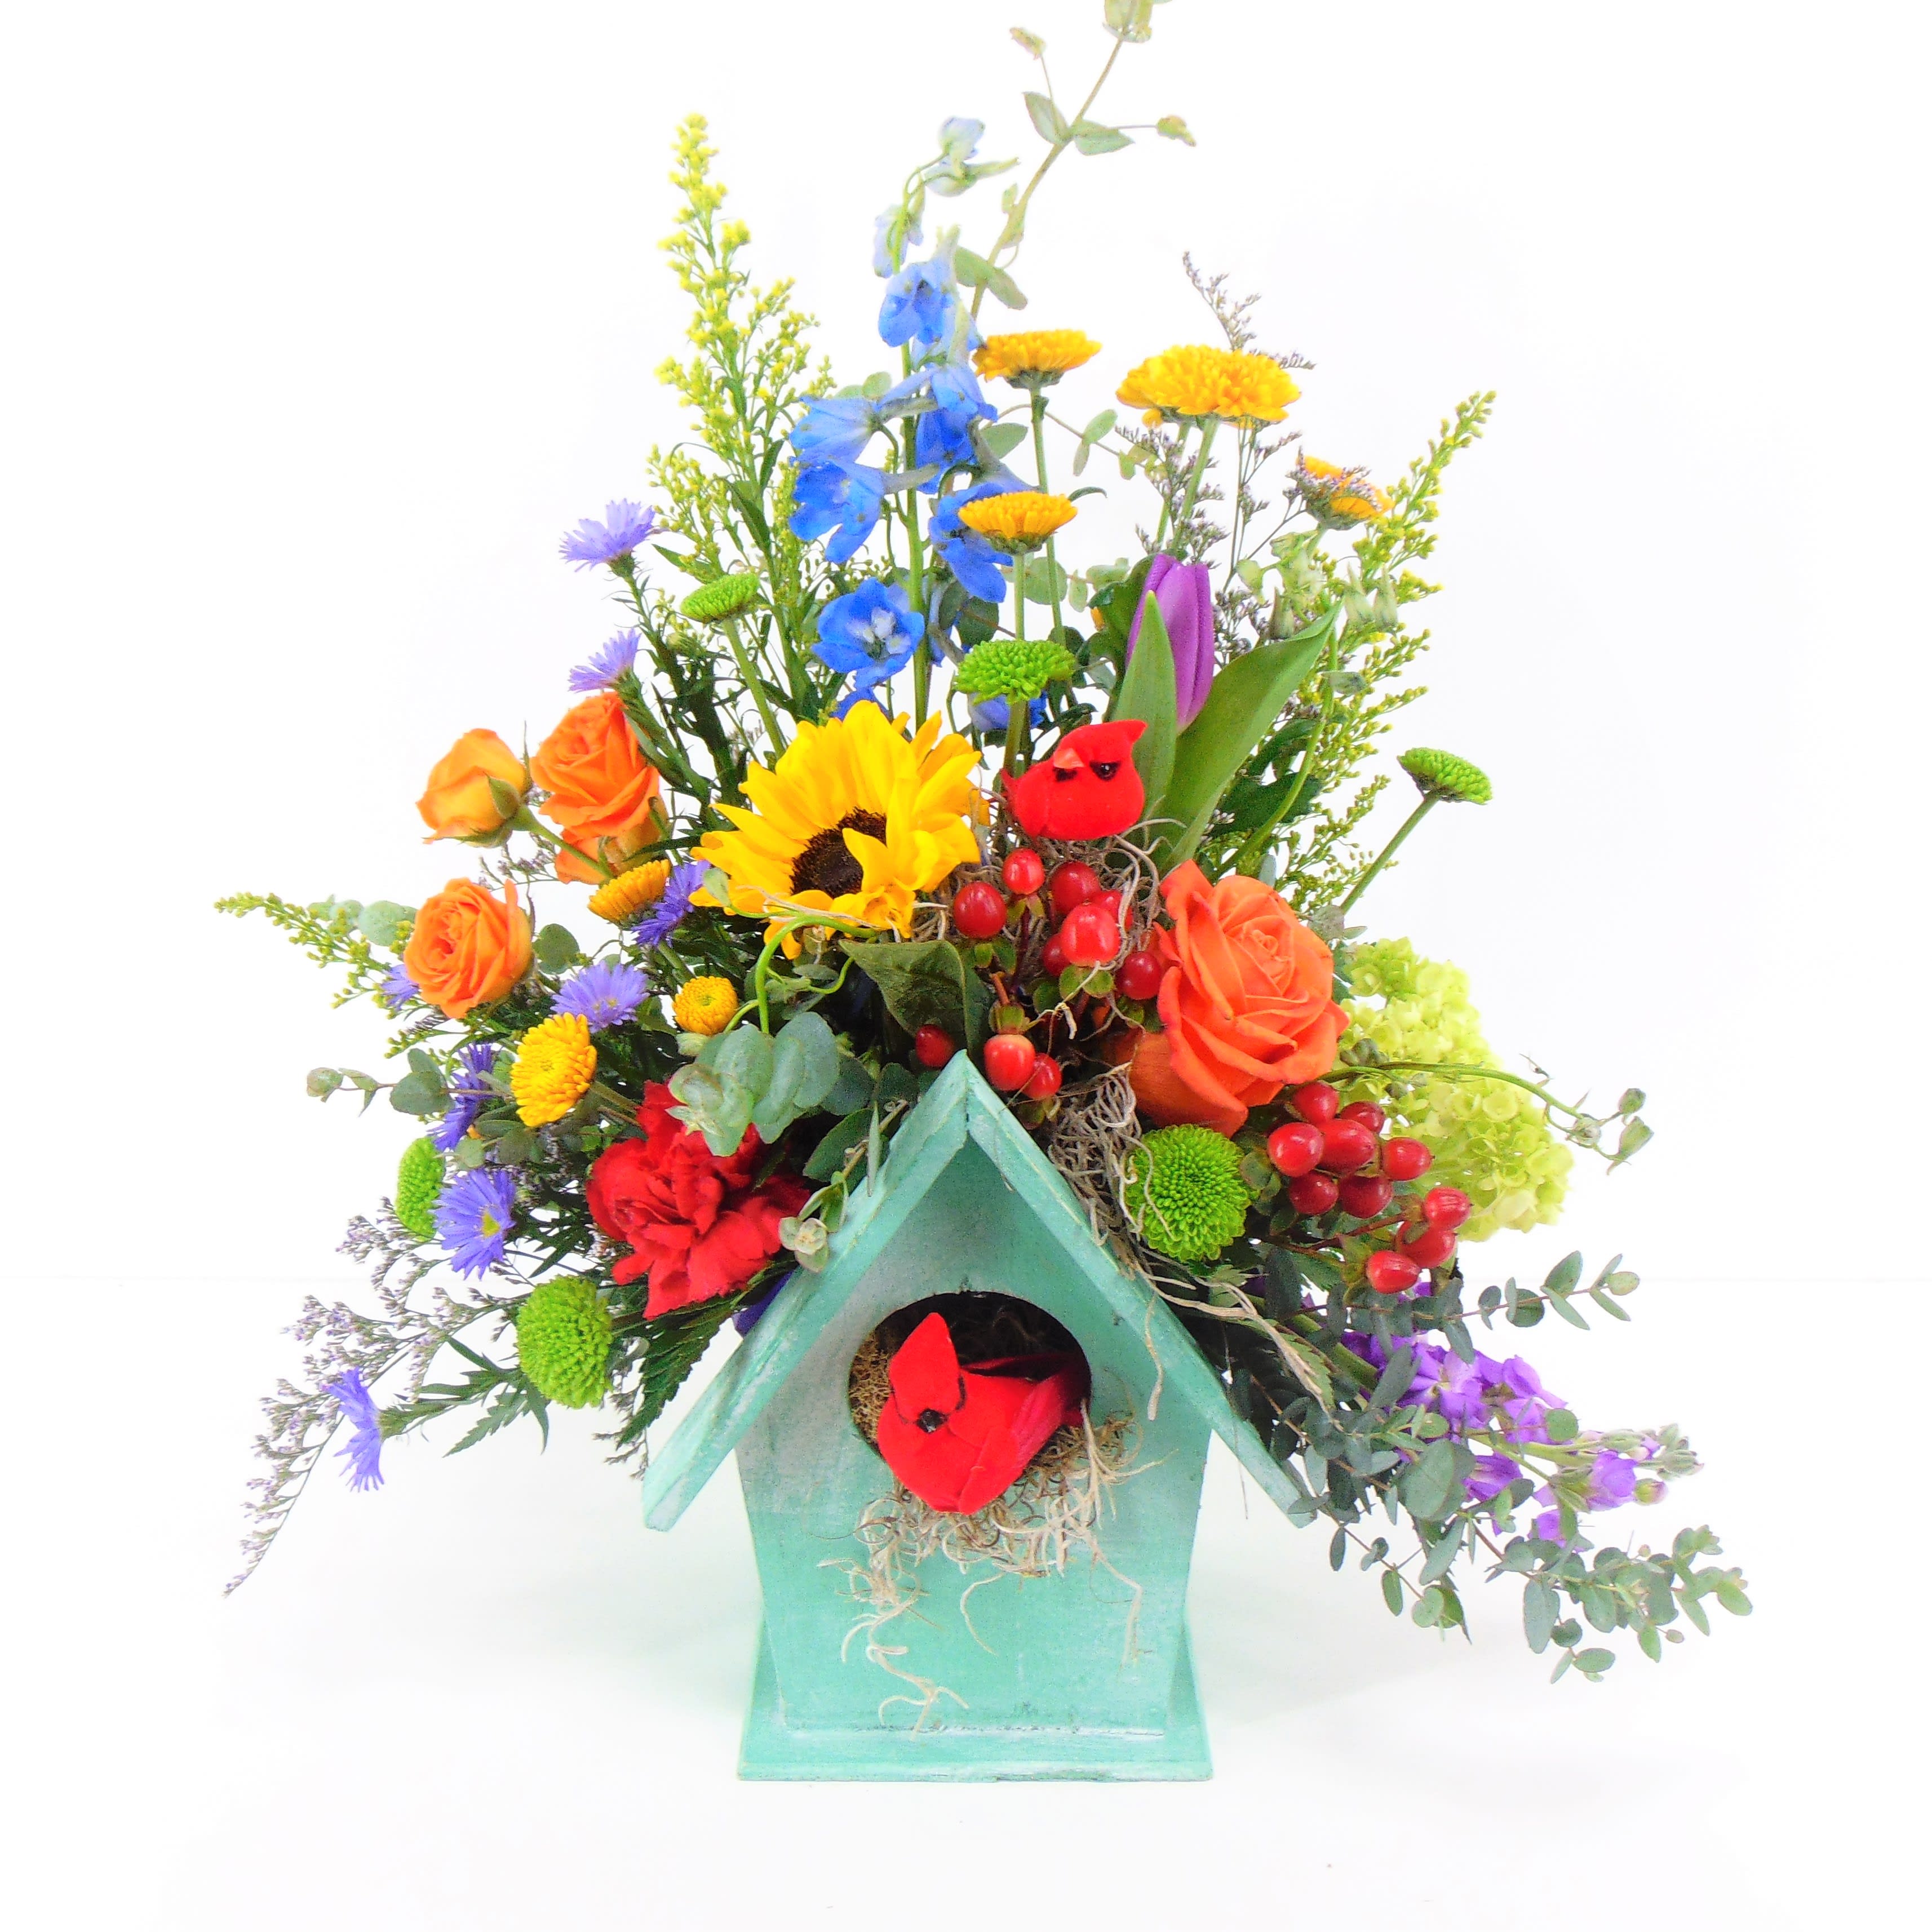 Enchanted Forest - An enchanted bouquet of fresh flowers artfully arranged to express nature's bounty   Deluxe option is pictured. Assorted birdhouse colors of yellow, green or pink.